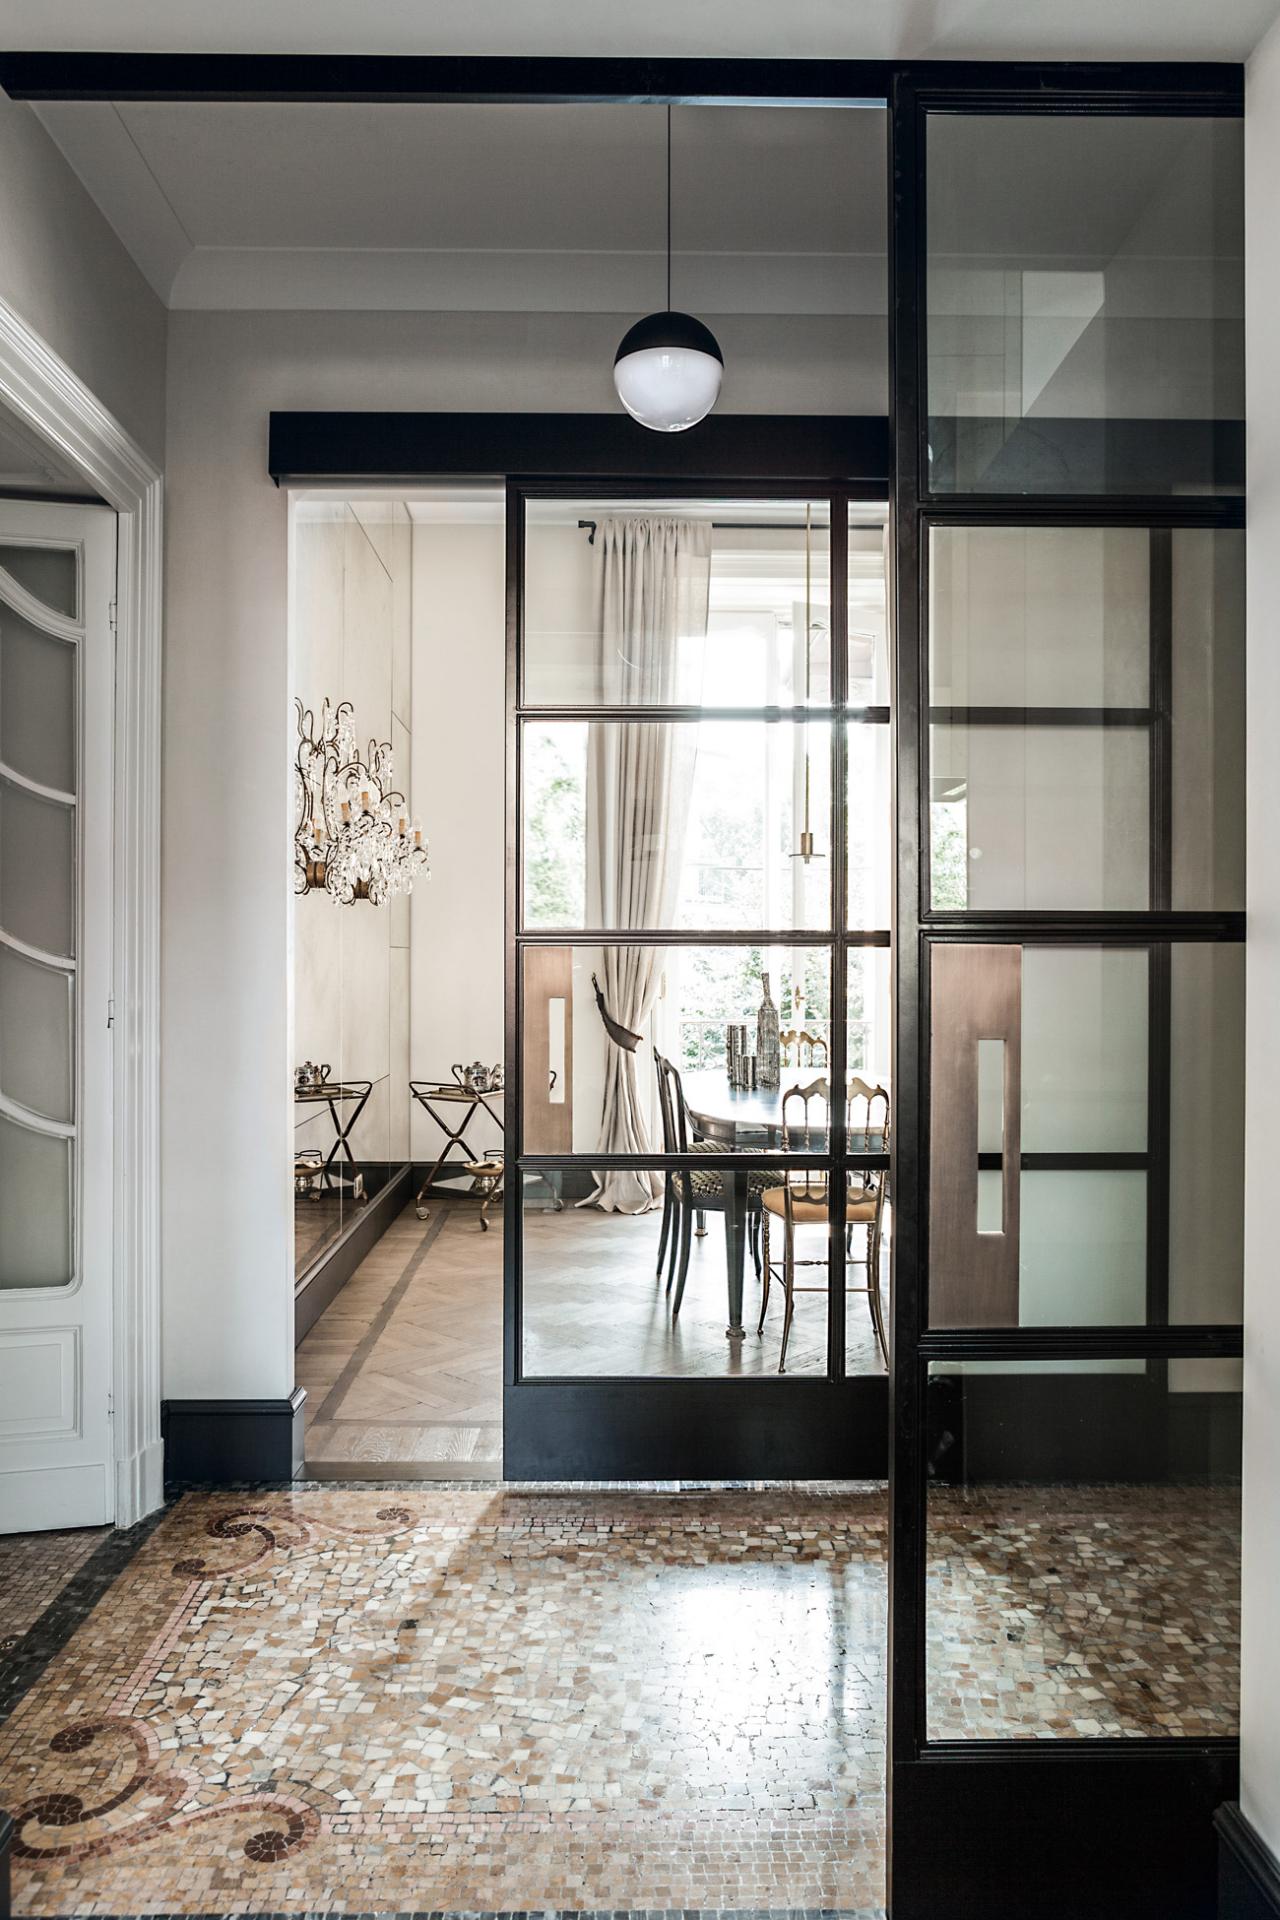 A Classic Milan Home Brimming with Old-World Charm